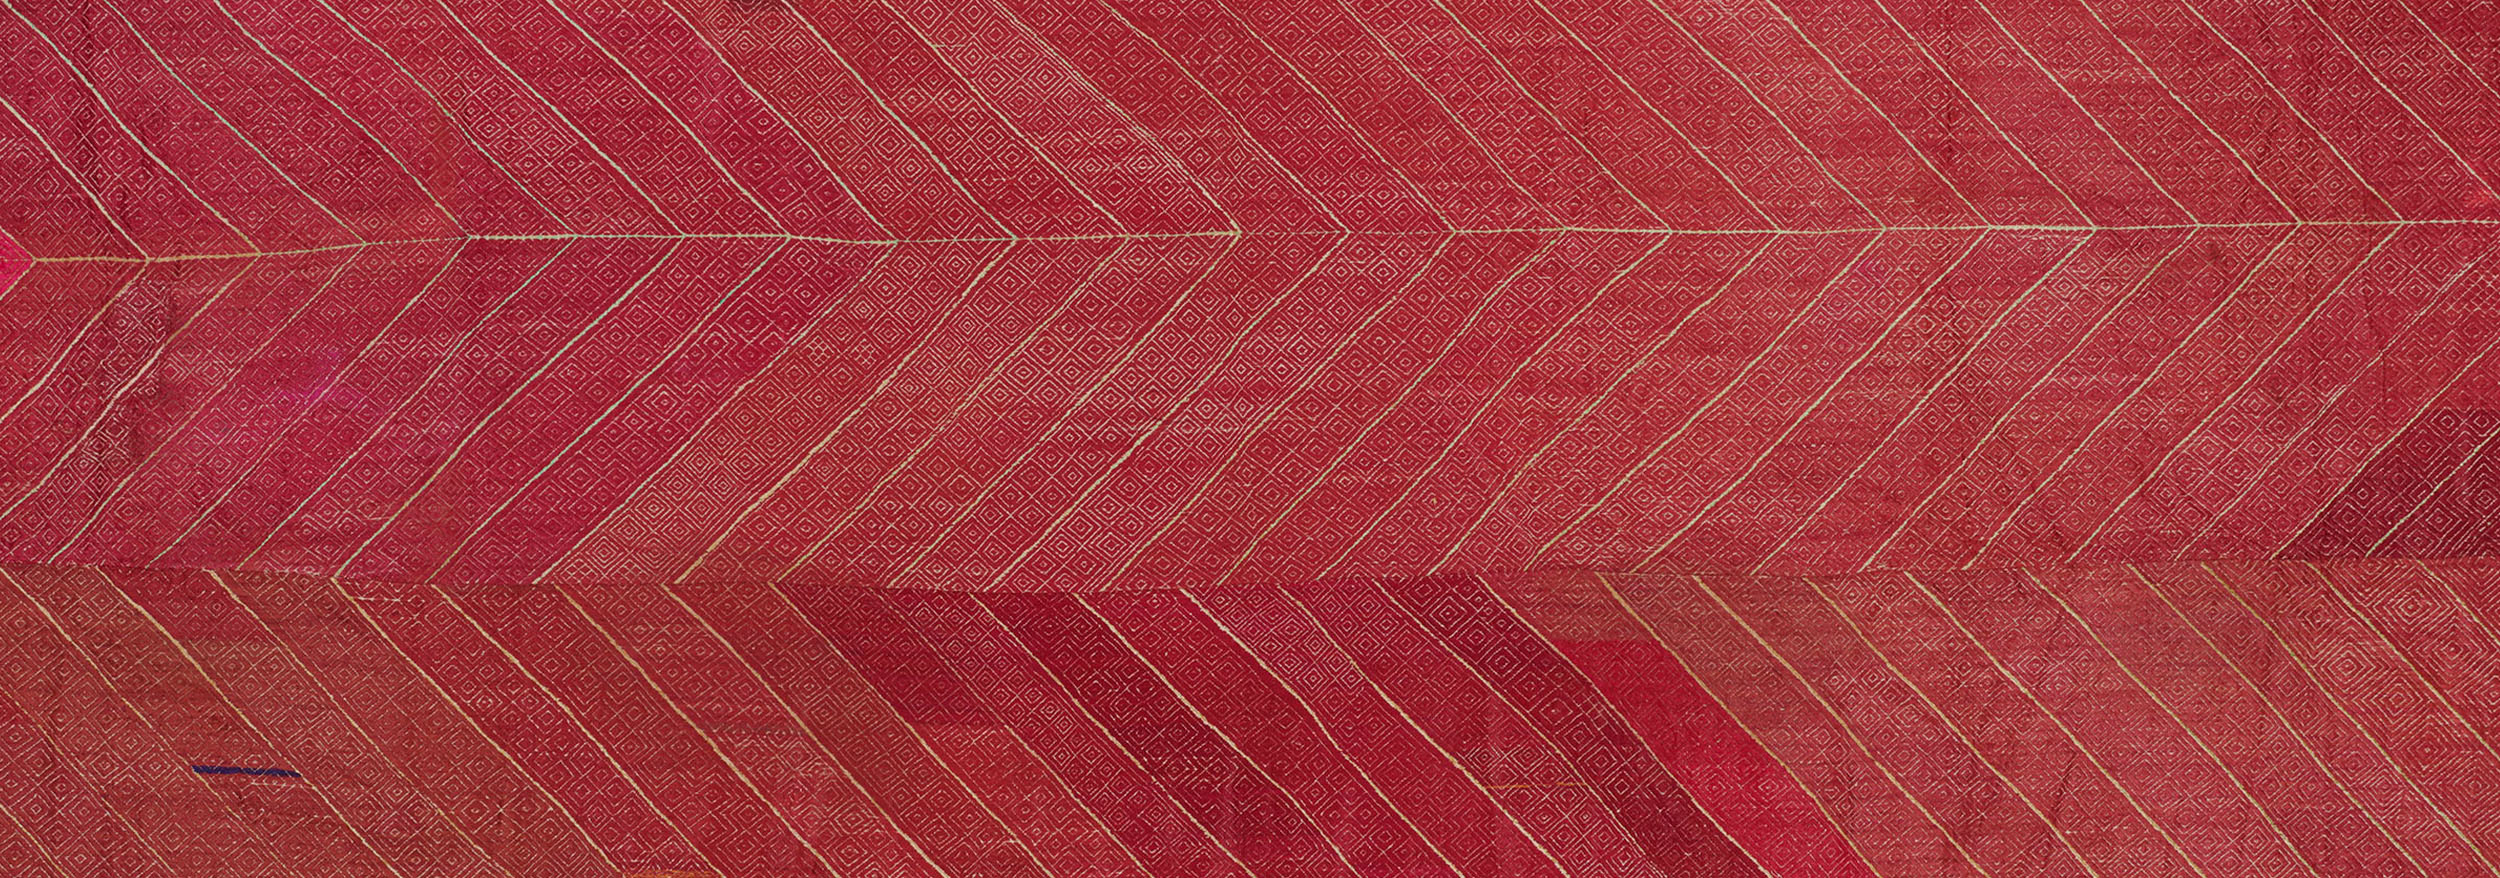 A Bagh Phulkari textile with three alternating rows of diagonal patterns filled with square motifs.